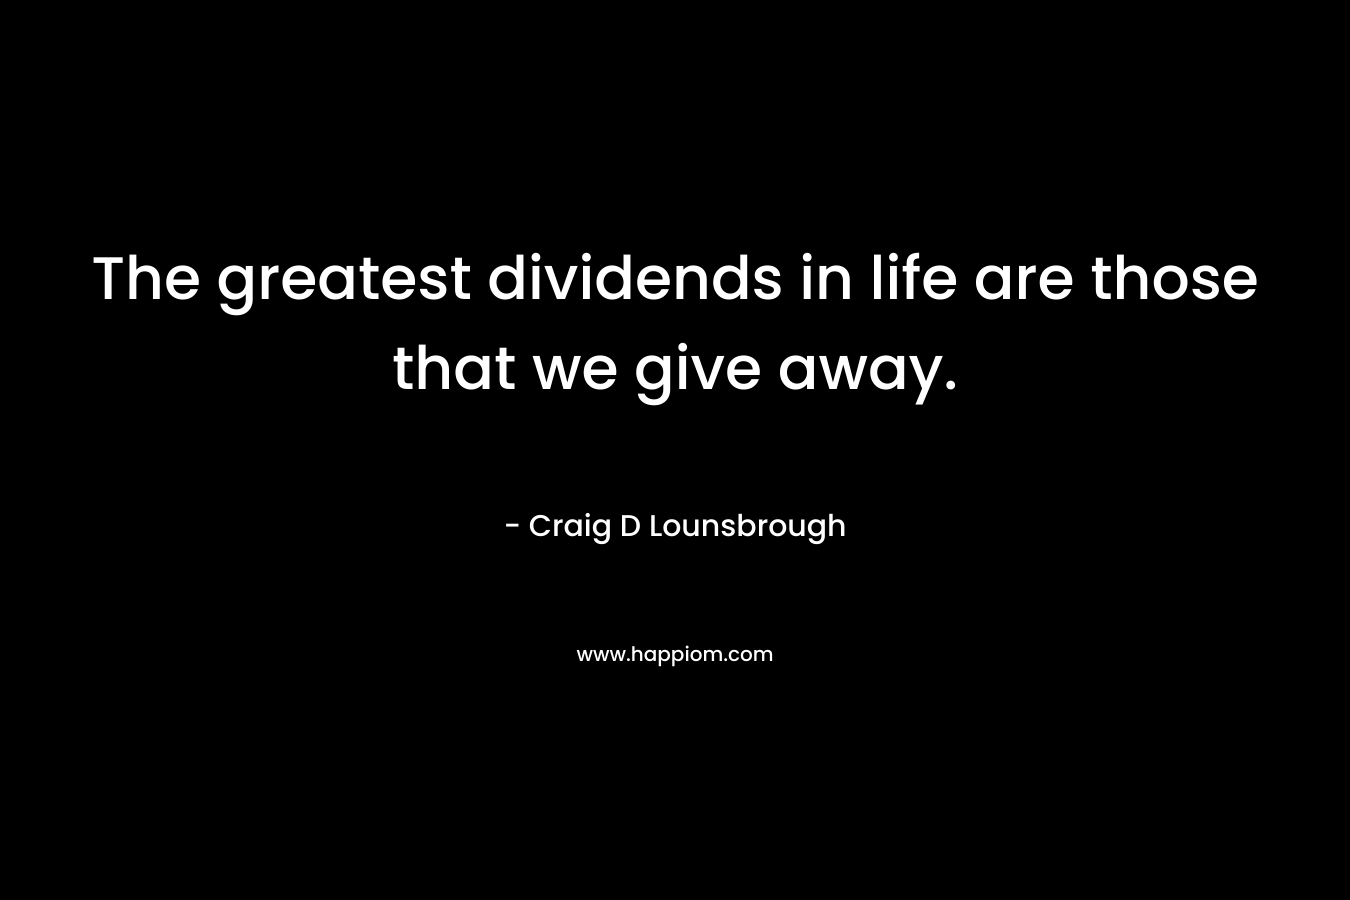 The greatest dividends in life are those that we give away. – Craig D Lounsbrough